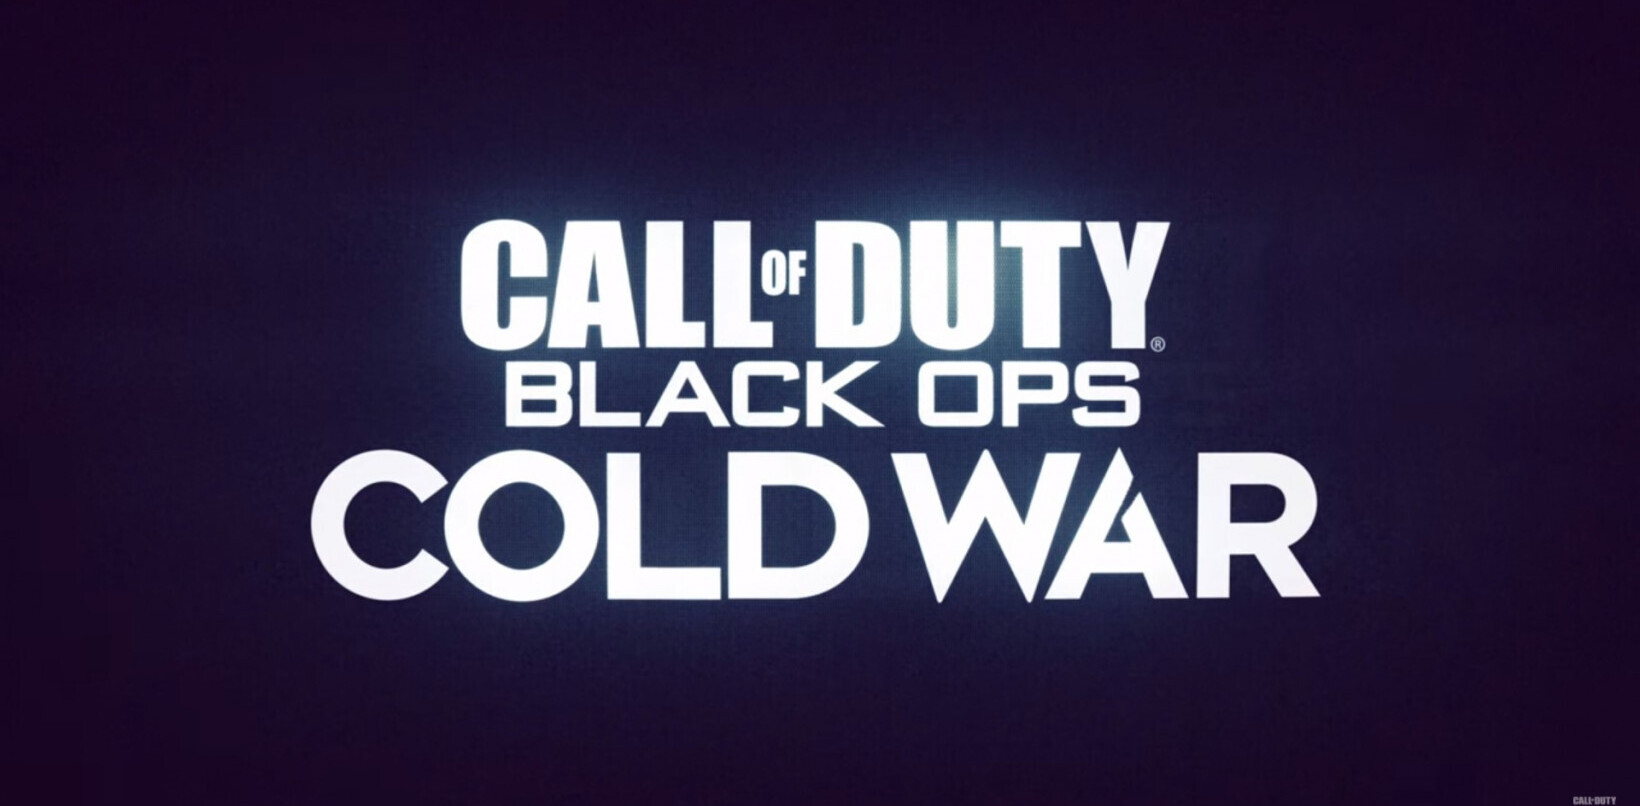 Call of Duty’s in-game Black Ops: Cold War reveal gets an ‘E’ for effort